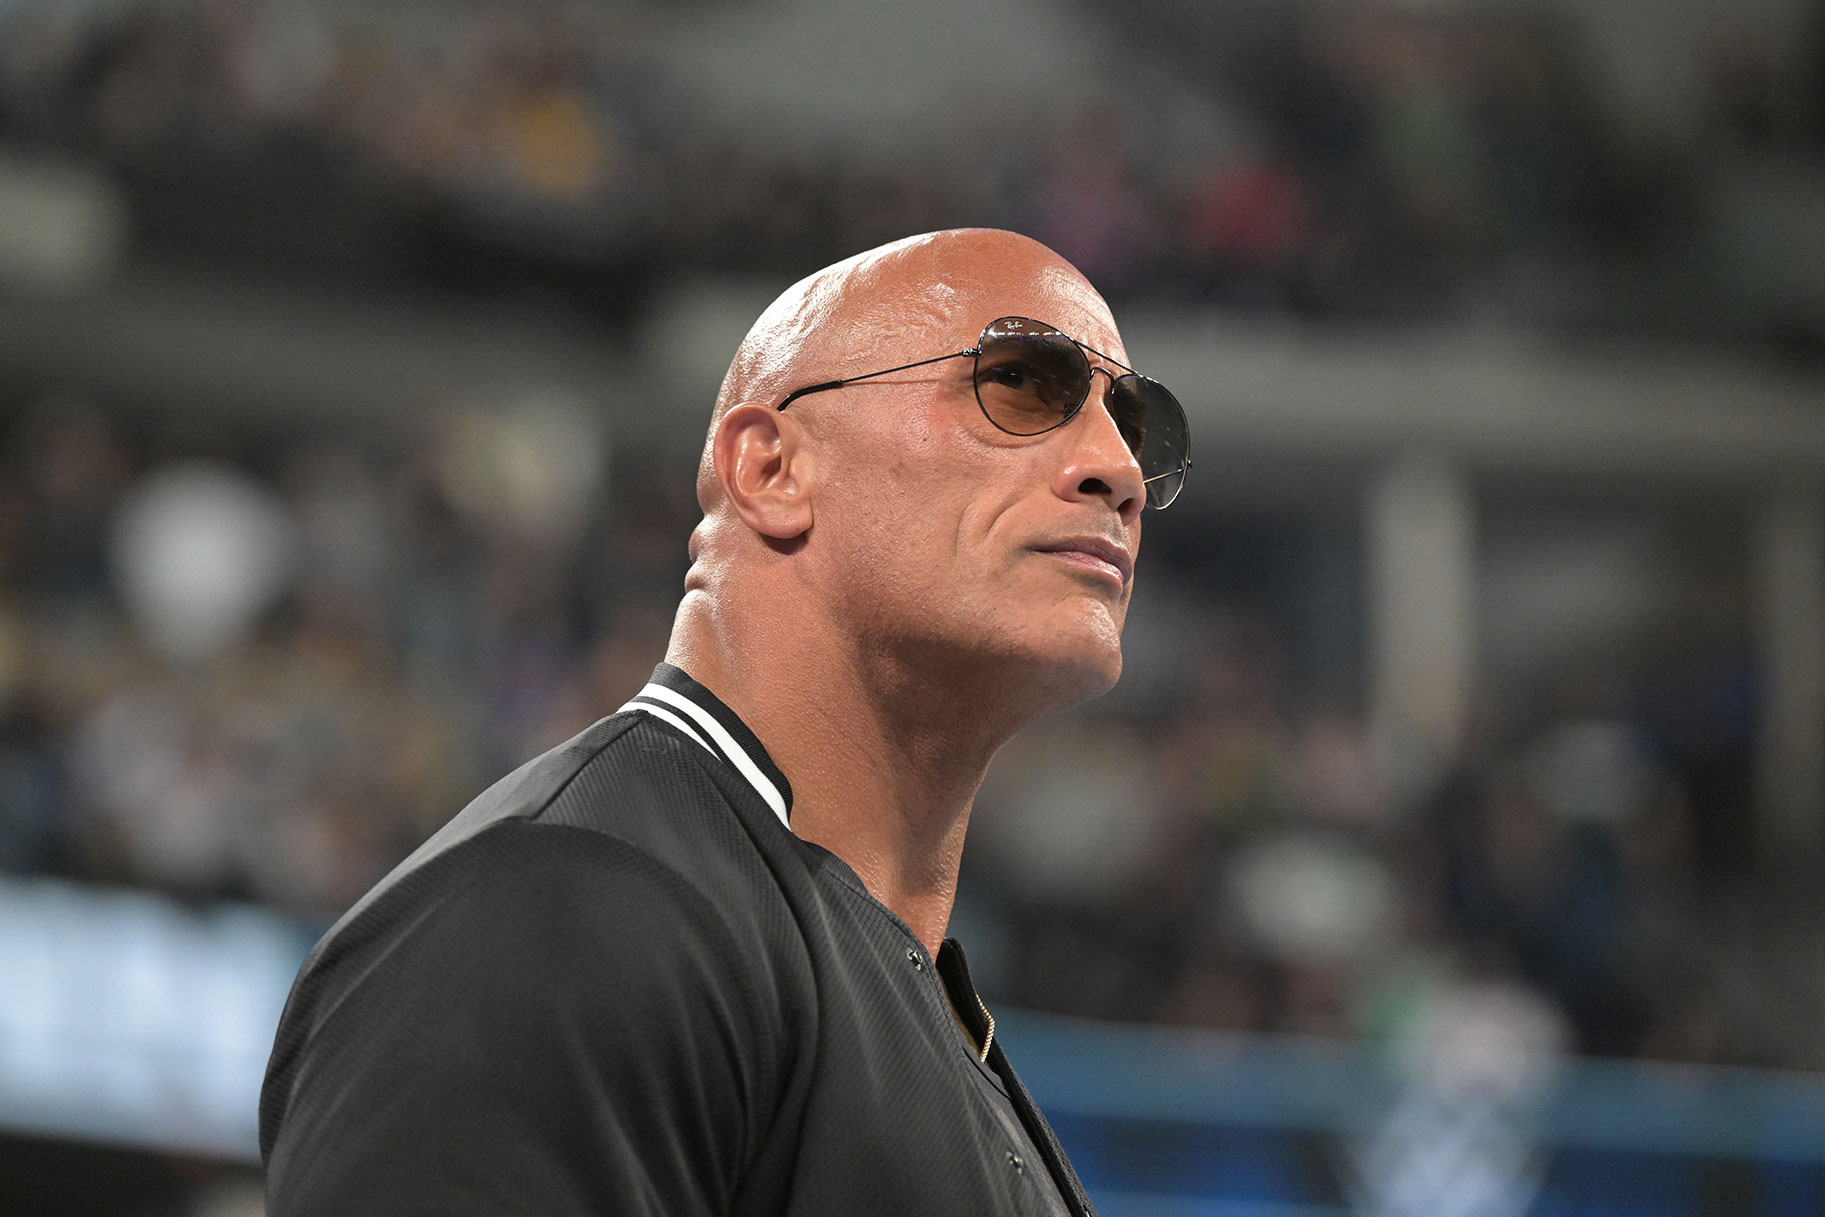 How The Rock's WWE Comeback Puts Spotlight on LA Knight: Fans React to Surprising Similarities